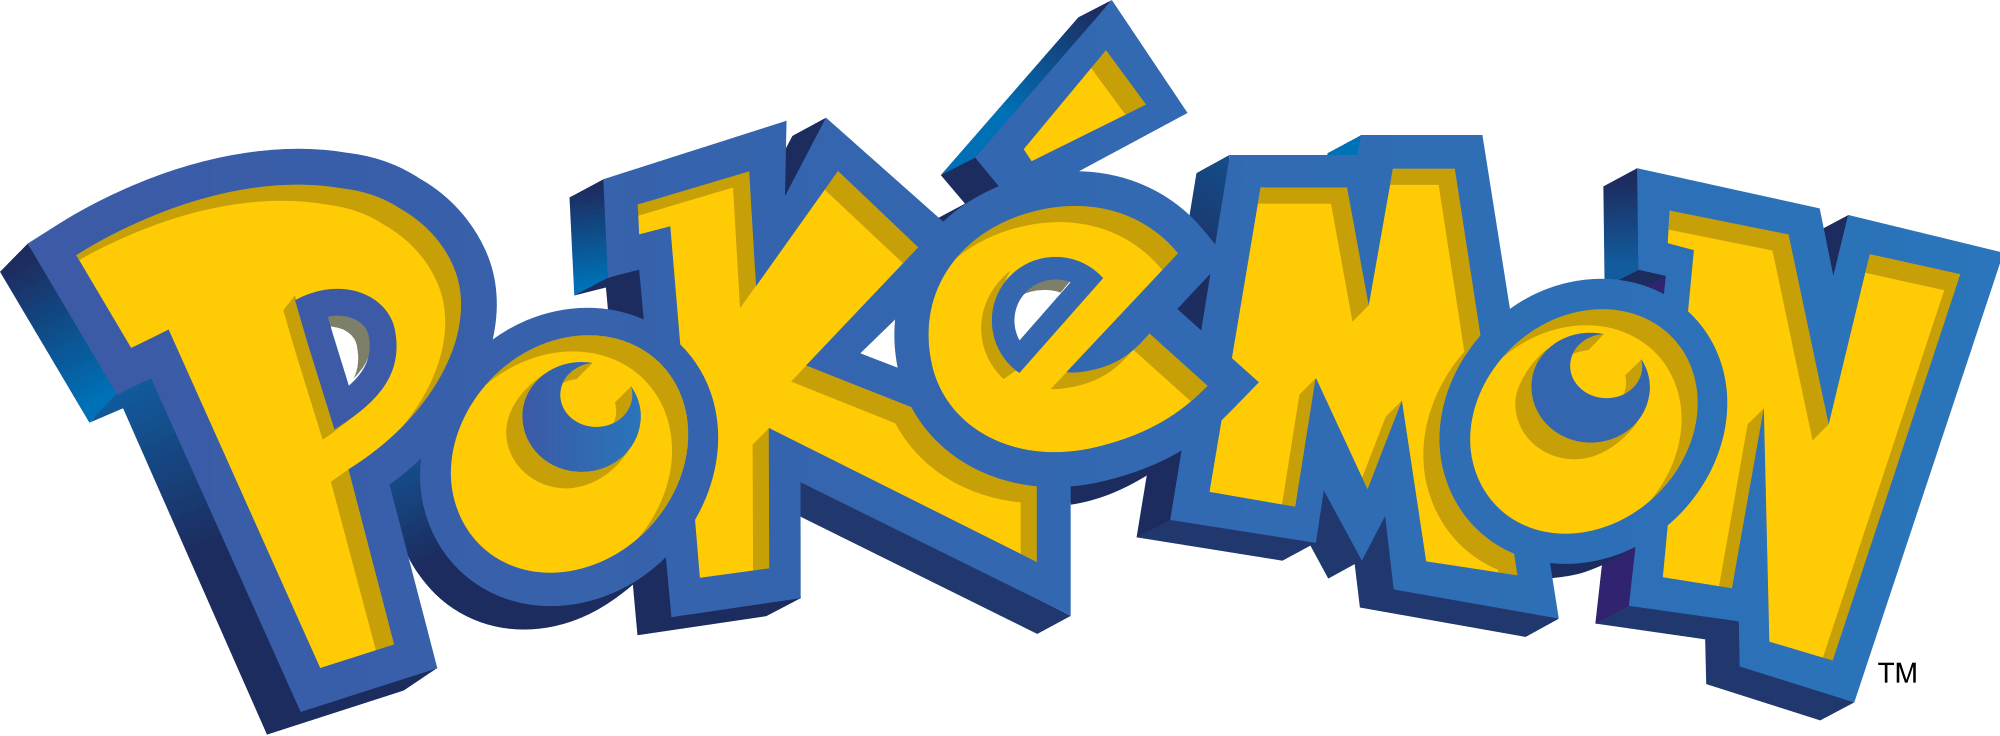 the Pokémon logo. the letters are yellow with a blue border and a 3d effect